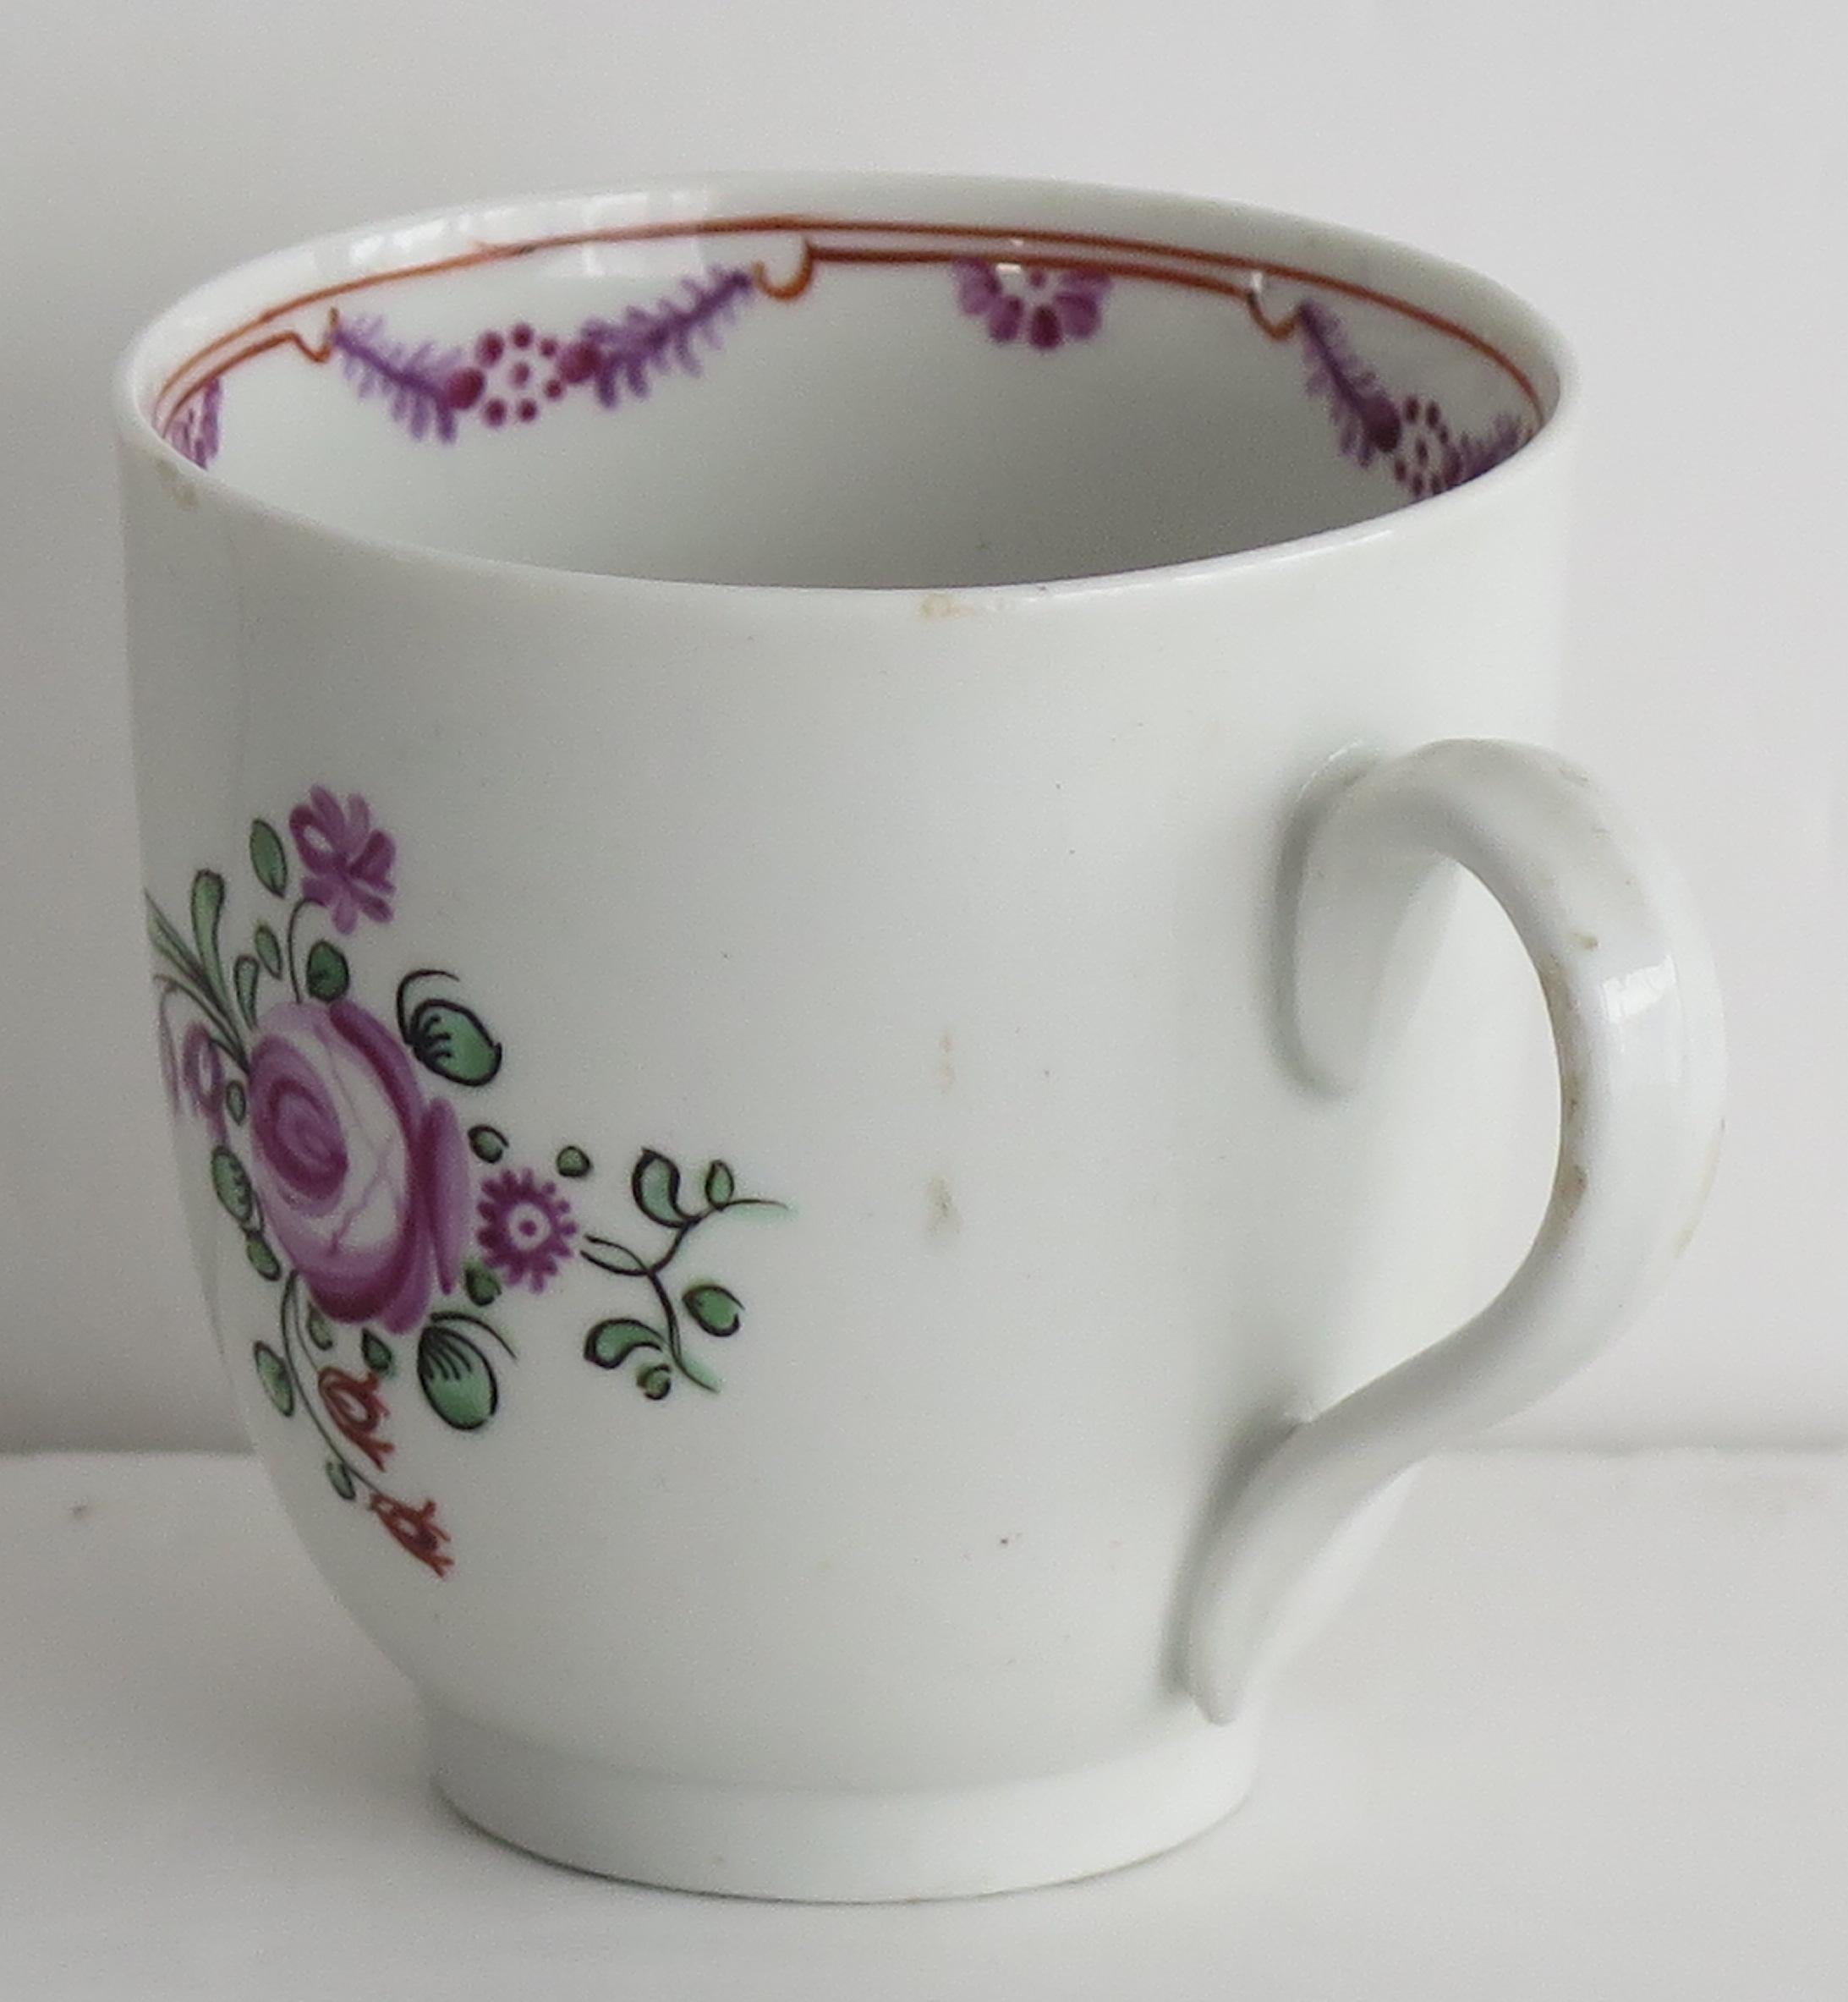 This is a hard paste porcelain coffee cup, by New Hall, dating to the late 18th century George 111rd period, circa 1790.

The piece is well potted on a low foot with a plain loop handle.

The cup is well decorated over-glaze with a very well